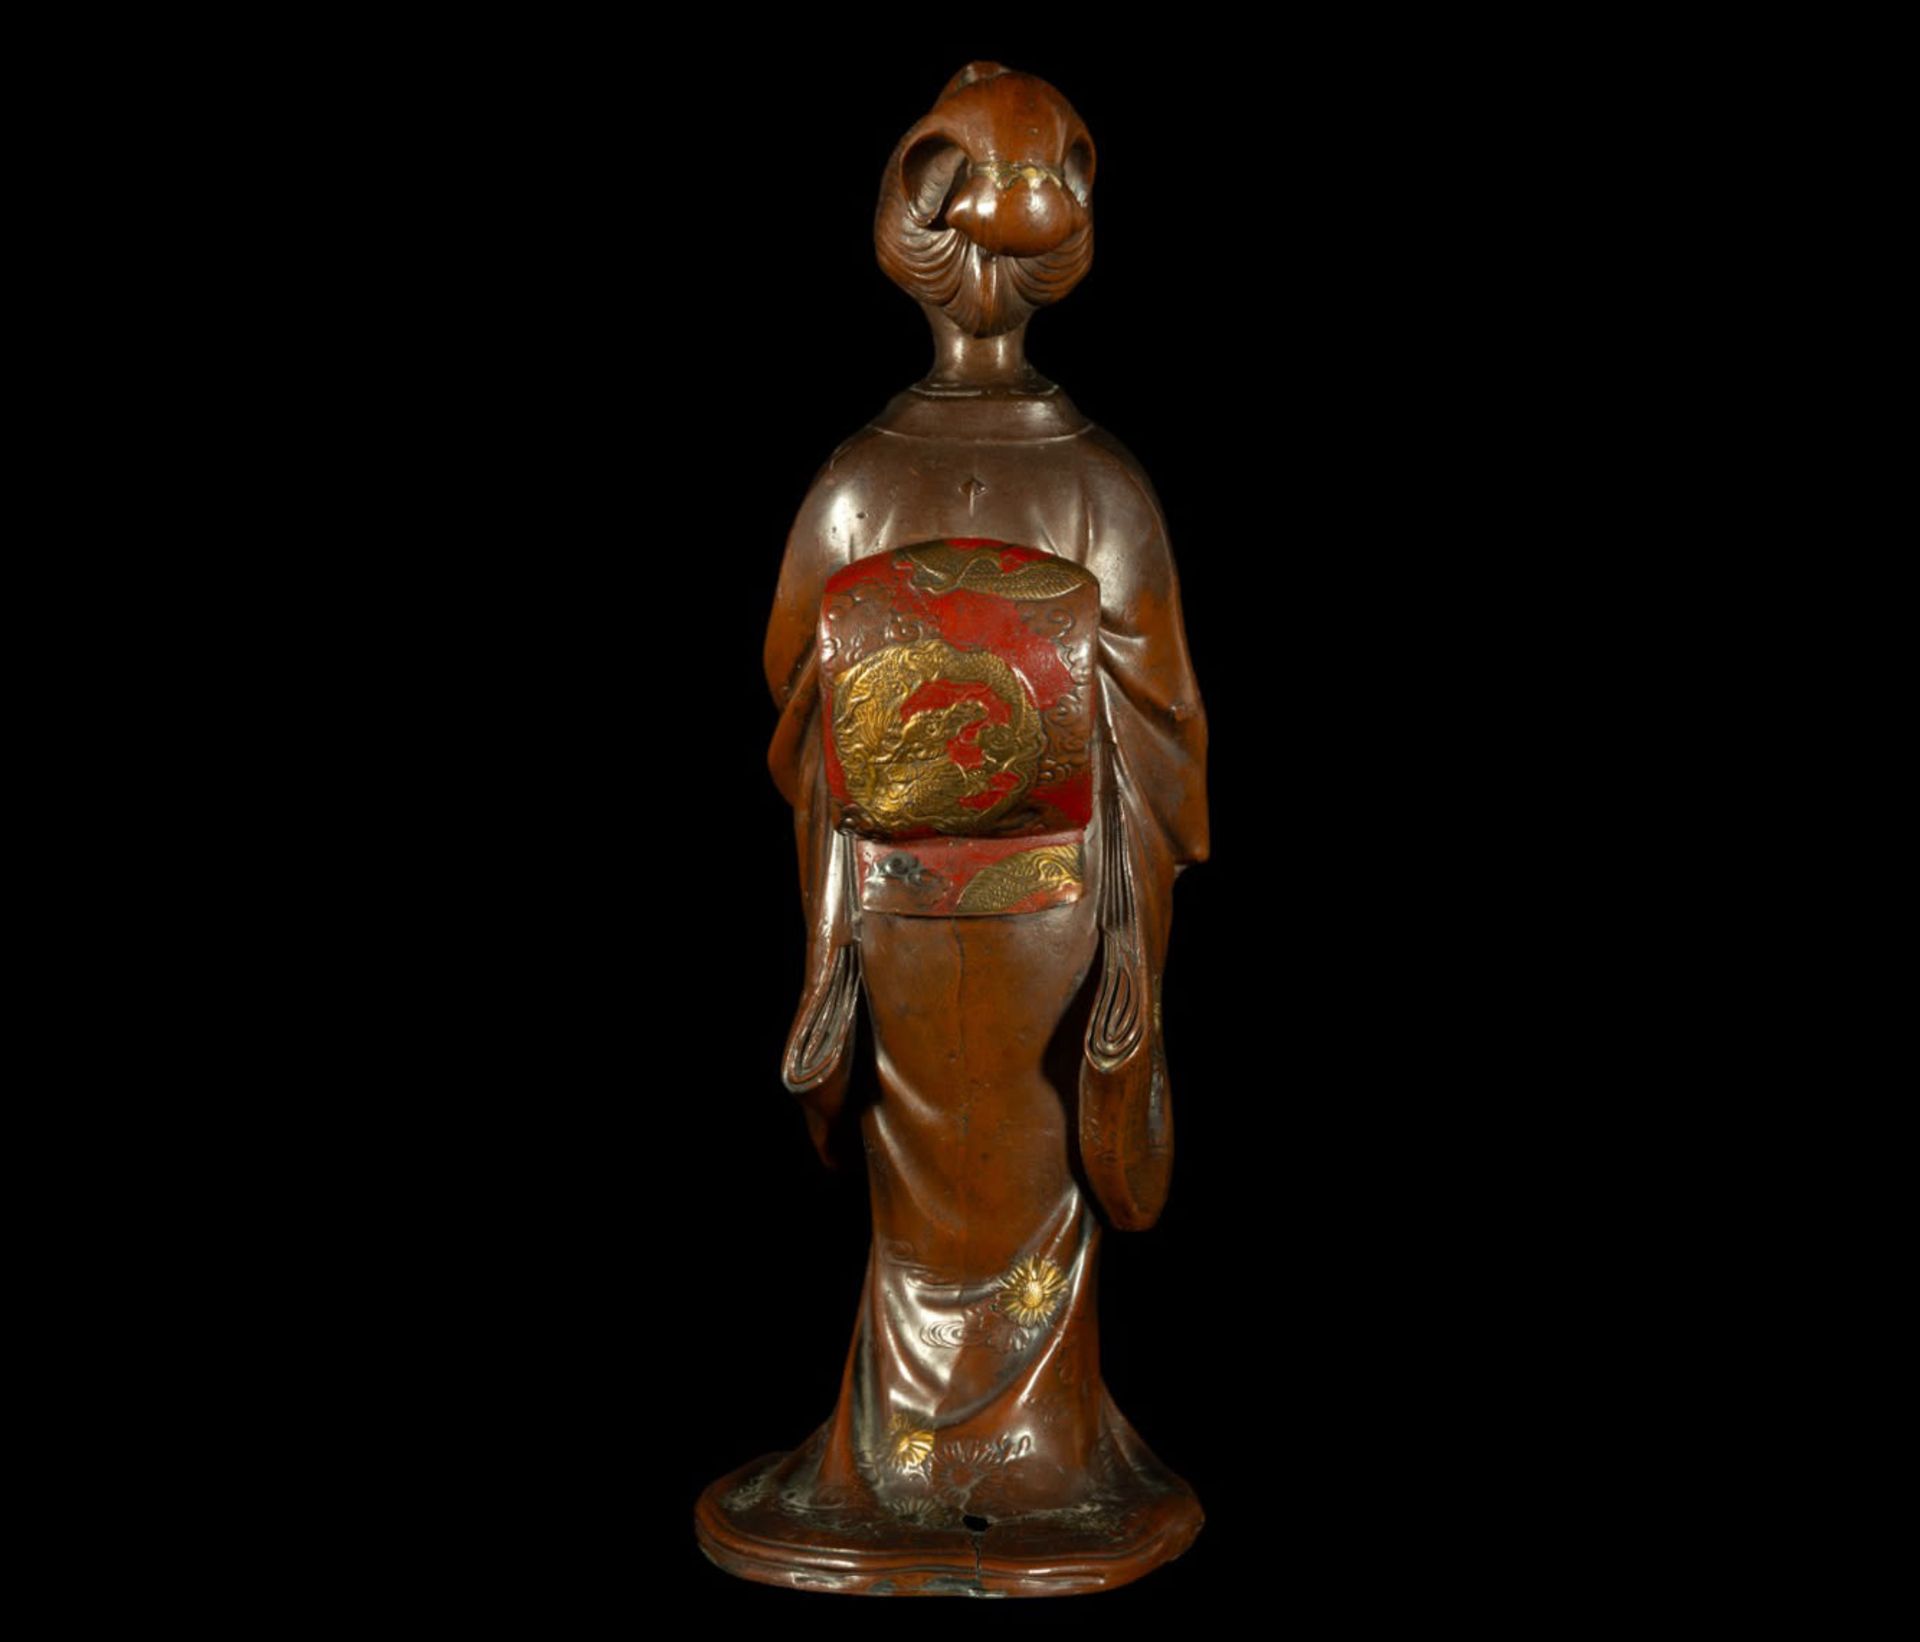 Exquisite Japanese Meiji Geisha in carved and gold-gilt "repoussé" copper, 19th century - Image 3 of 7